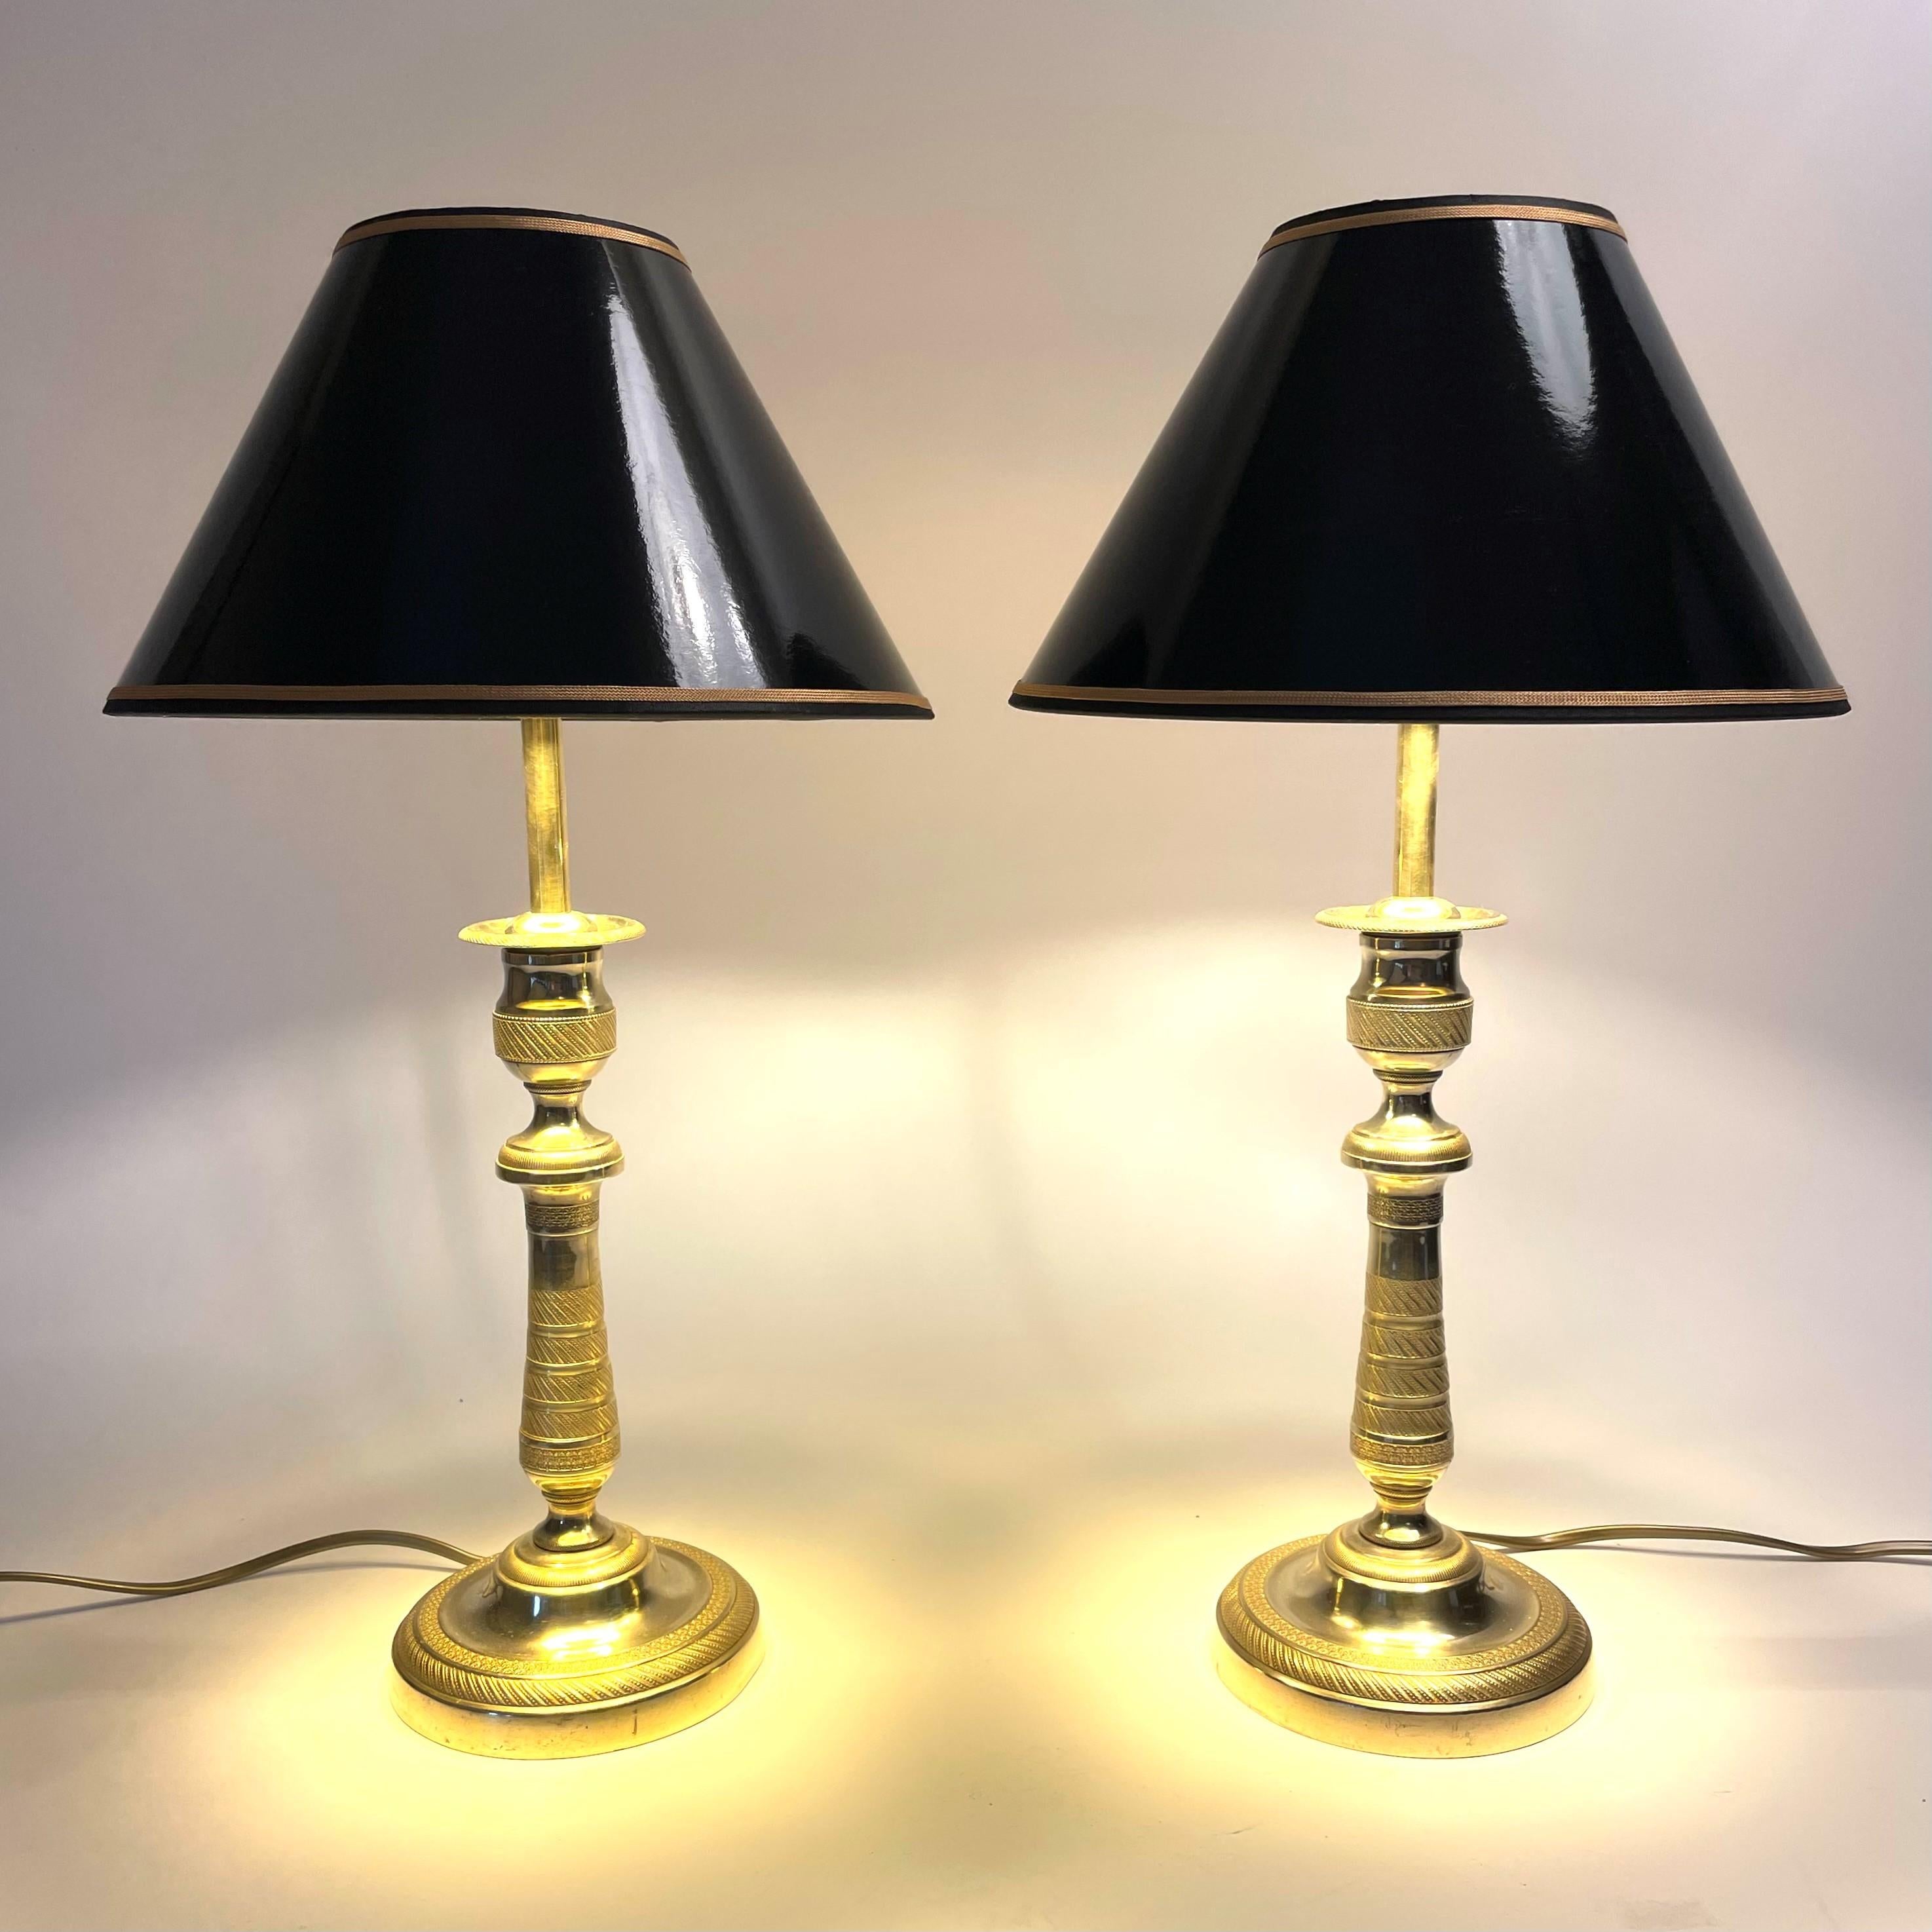 French Beautiful Pair of Table Lamps, Originally Empire Candlesticks